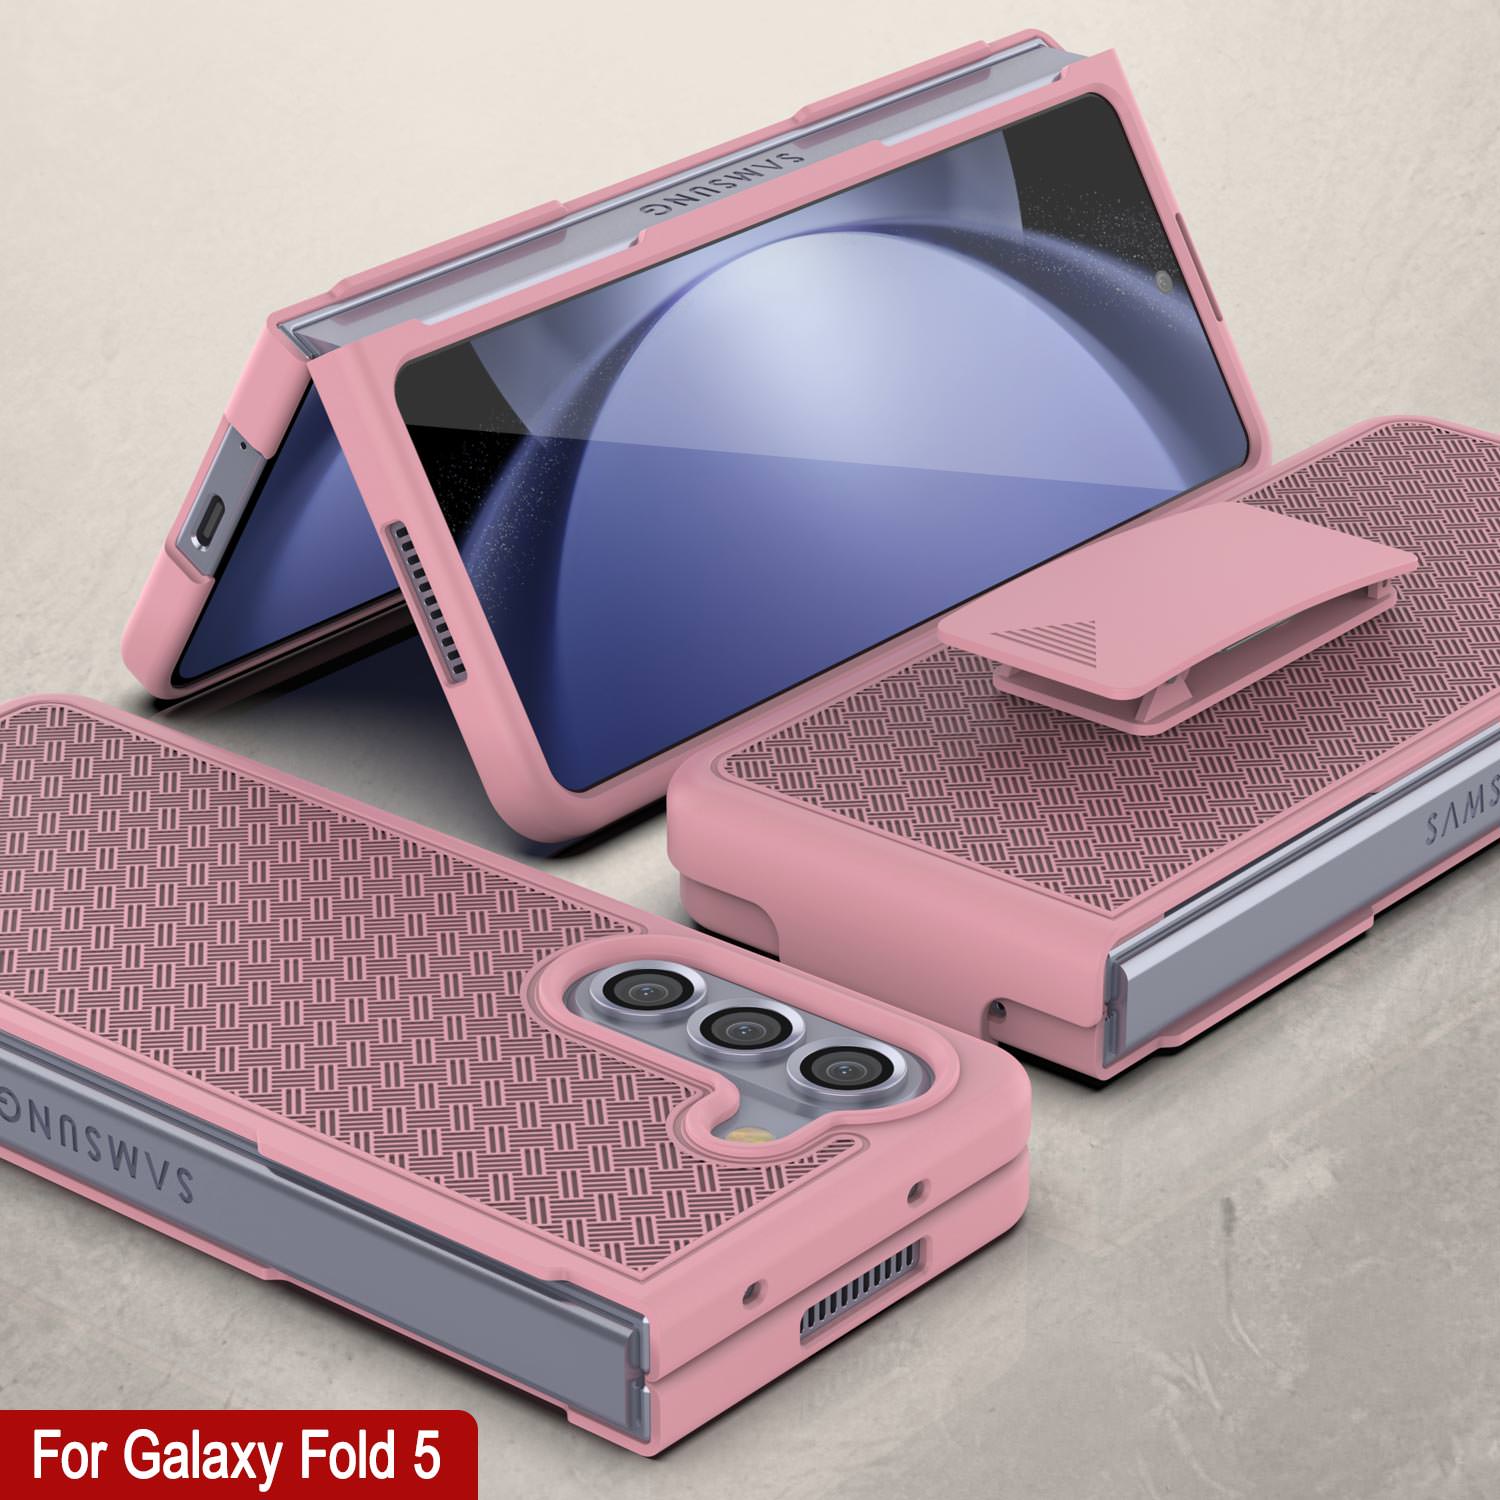 Galaxy Z Fold5 Case With Tempered Glass Screen Protector, Holster Belt Clip & Built-In Kickstand [Pink]